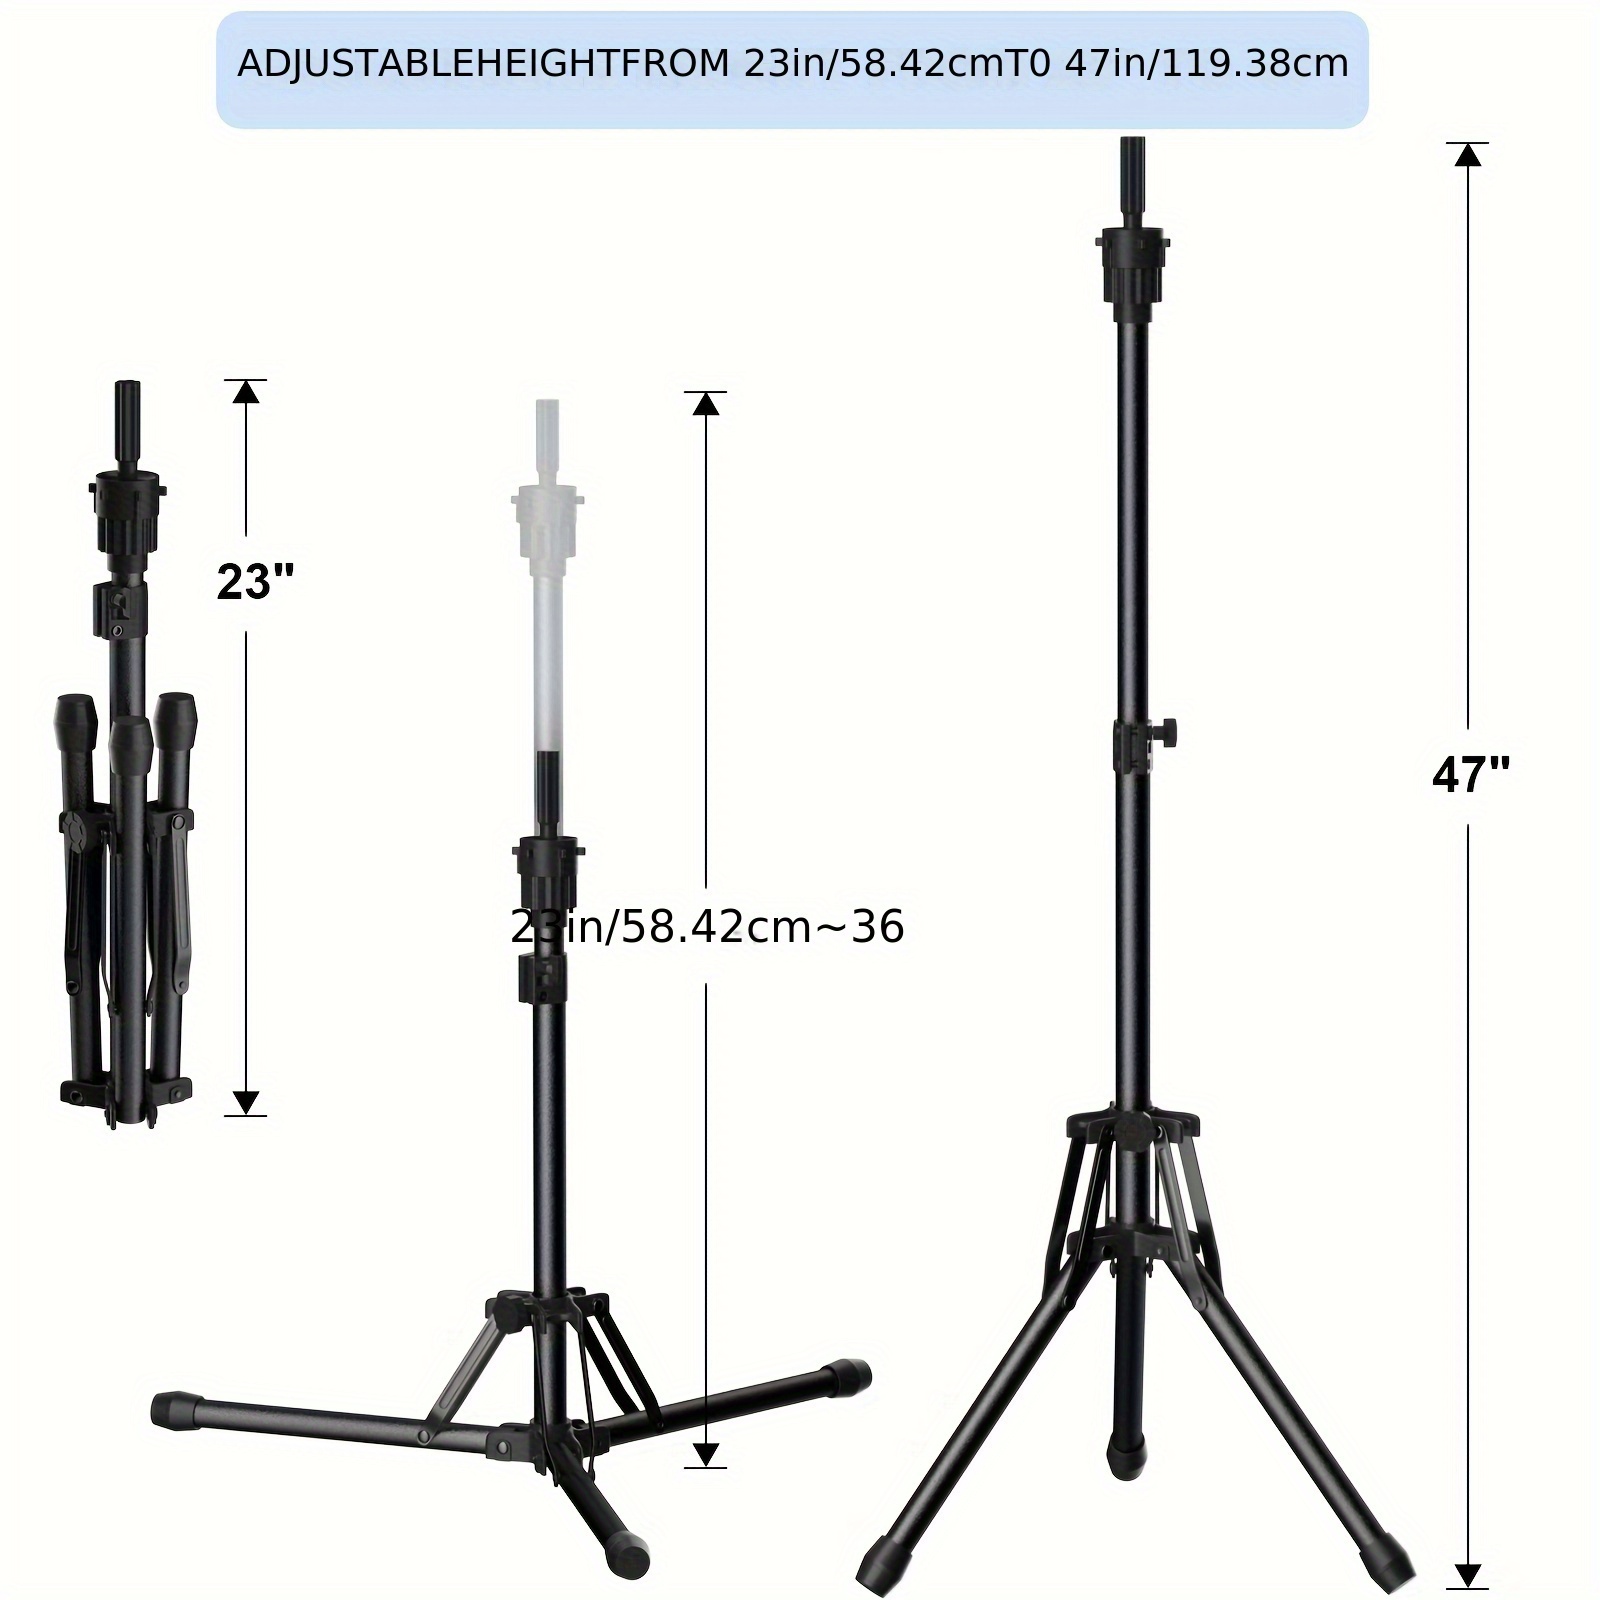  ORWOD Wig Head Stand Adjustable Height - Upgrade Wig Tripod  Stand with Reinforced Tool Tray , Foldable Mannequin Head Stand for Beauty  and Hairdressing Styling Training (Additional 1 Free Accessory) 